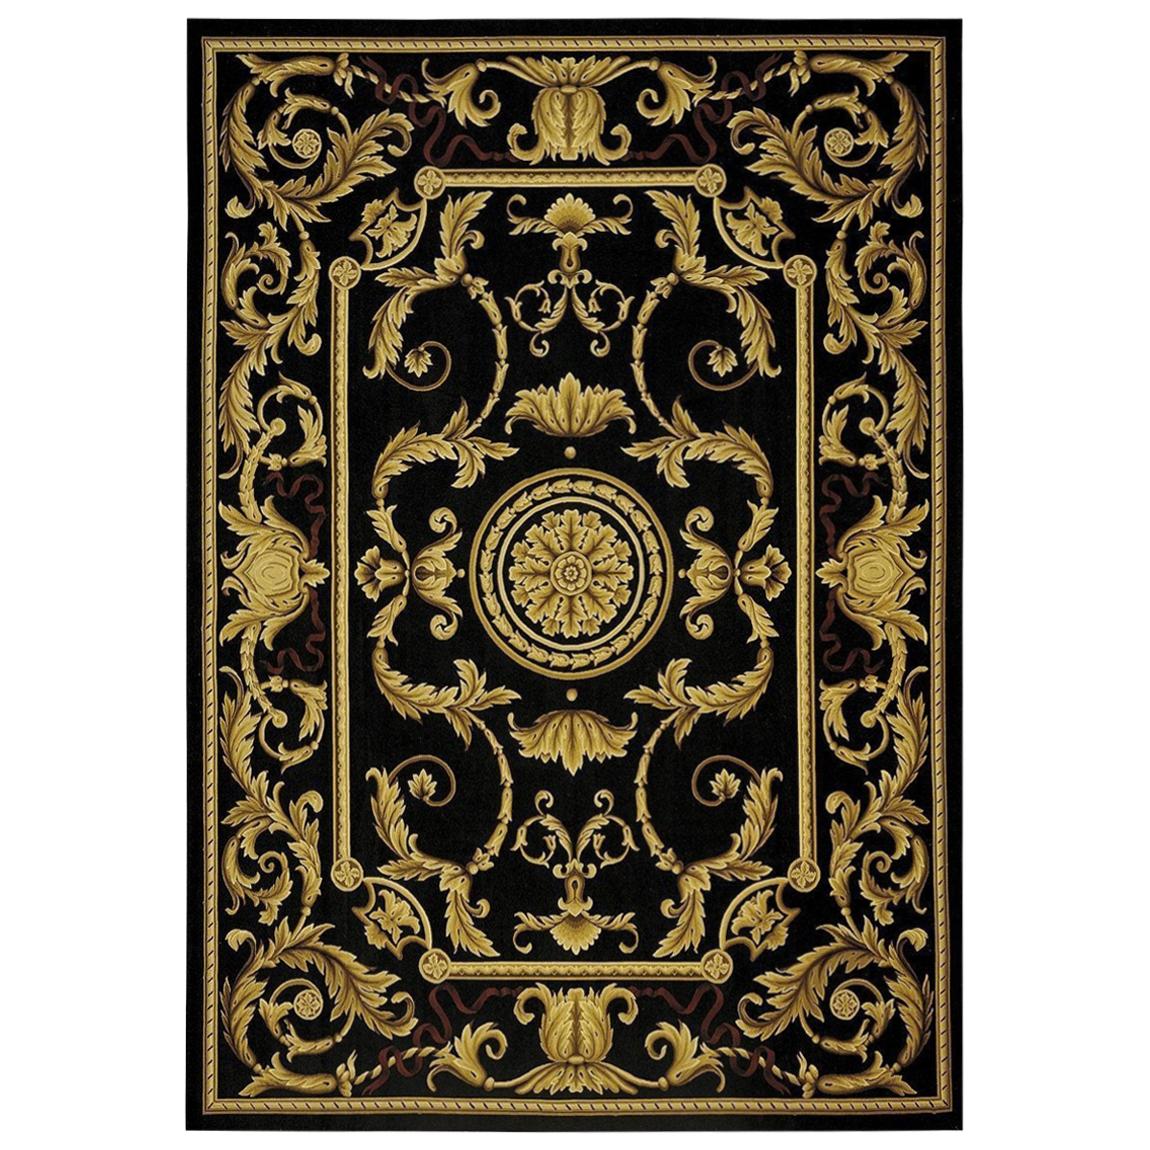 Aubusson Style Handwoven Wool Area Rug 13'11 x 19'9